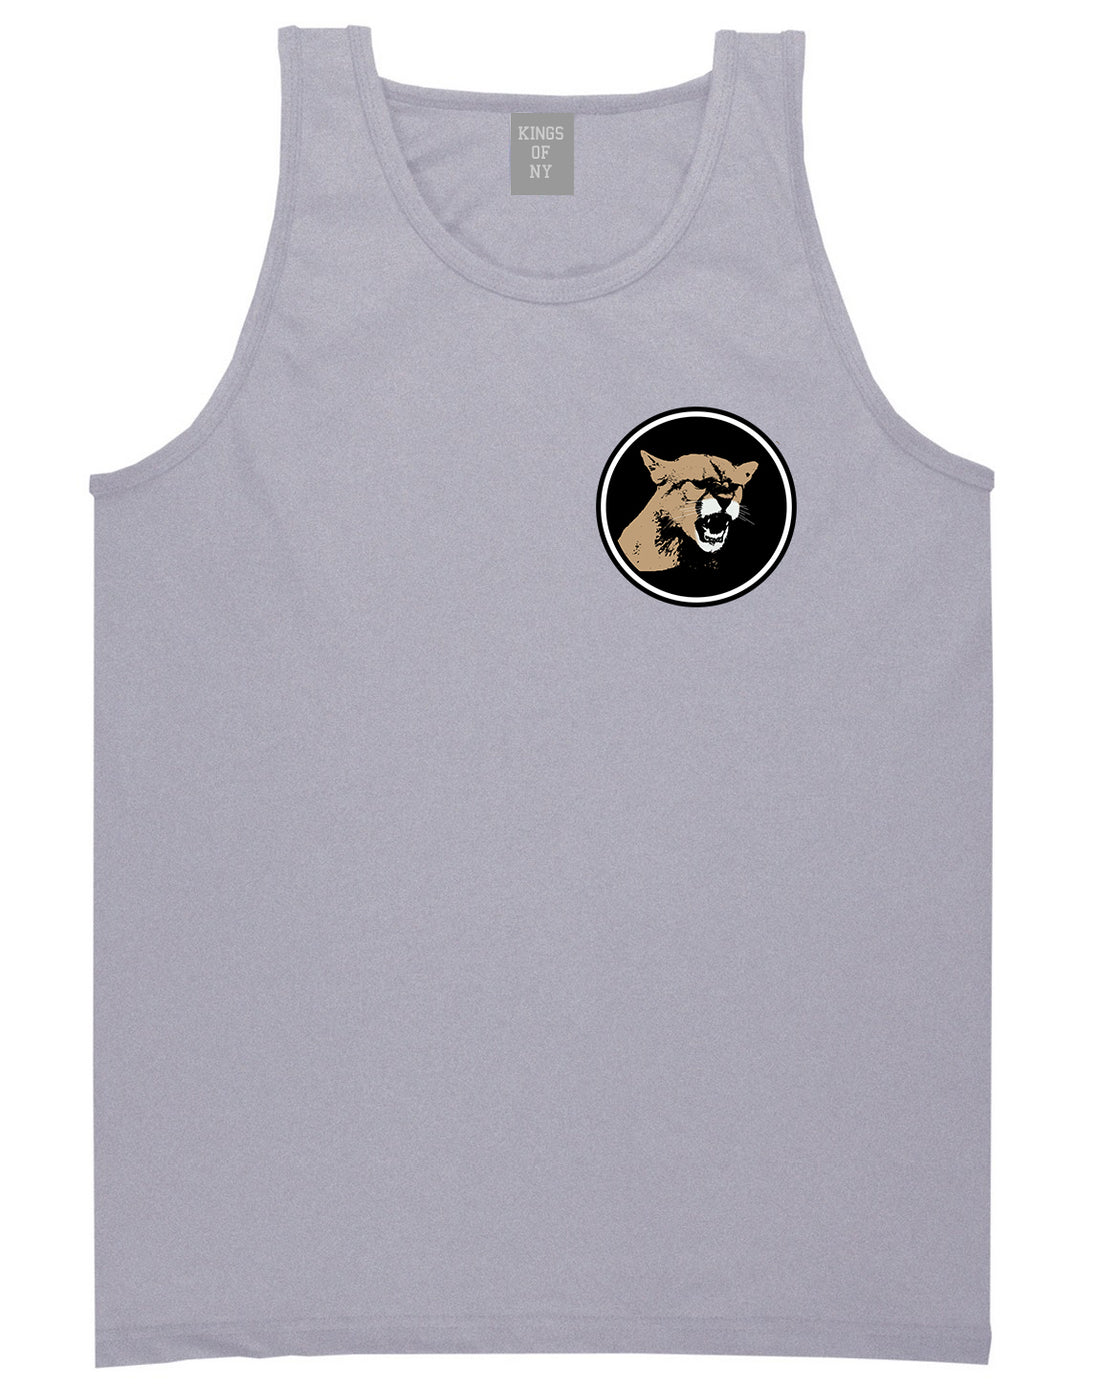 Angry Cougar Chest Grey Tank Top Shirt by Kings Of NY